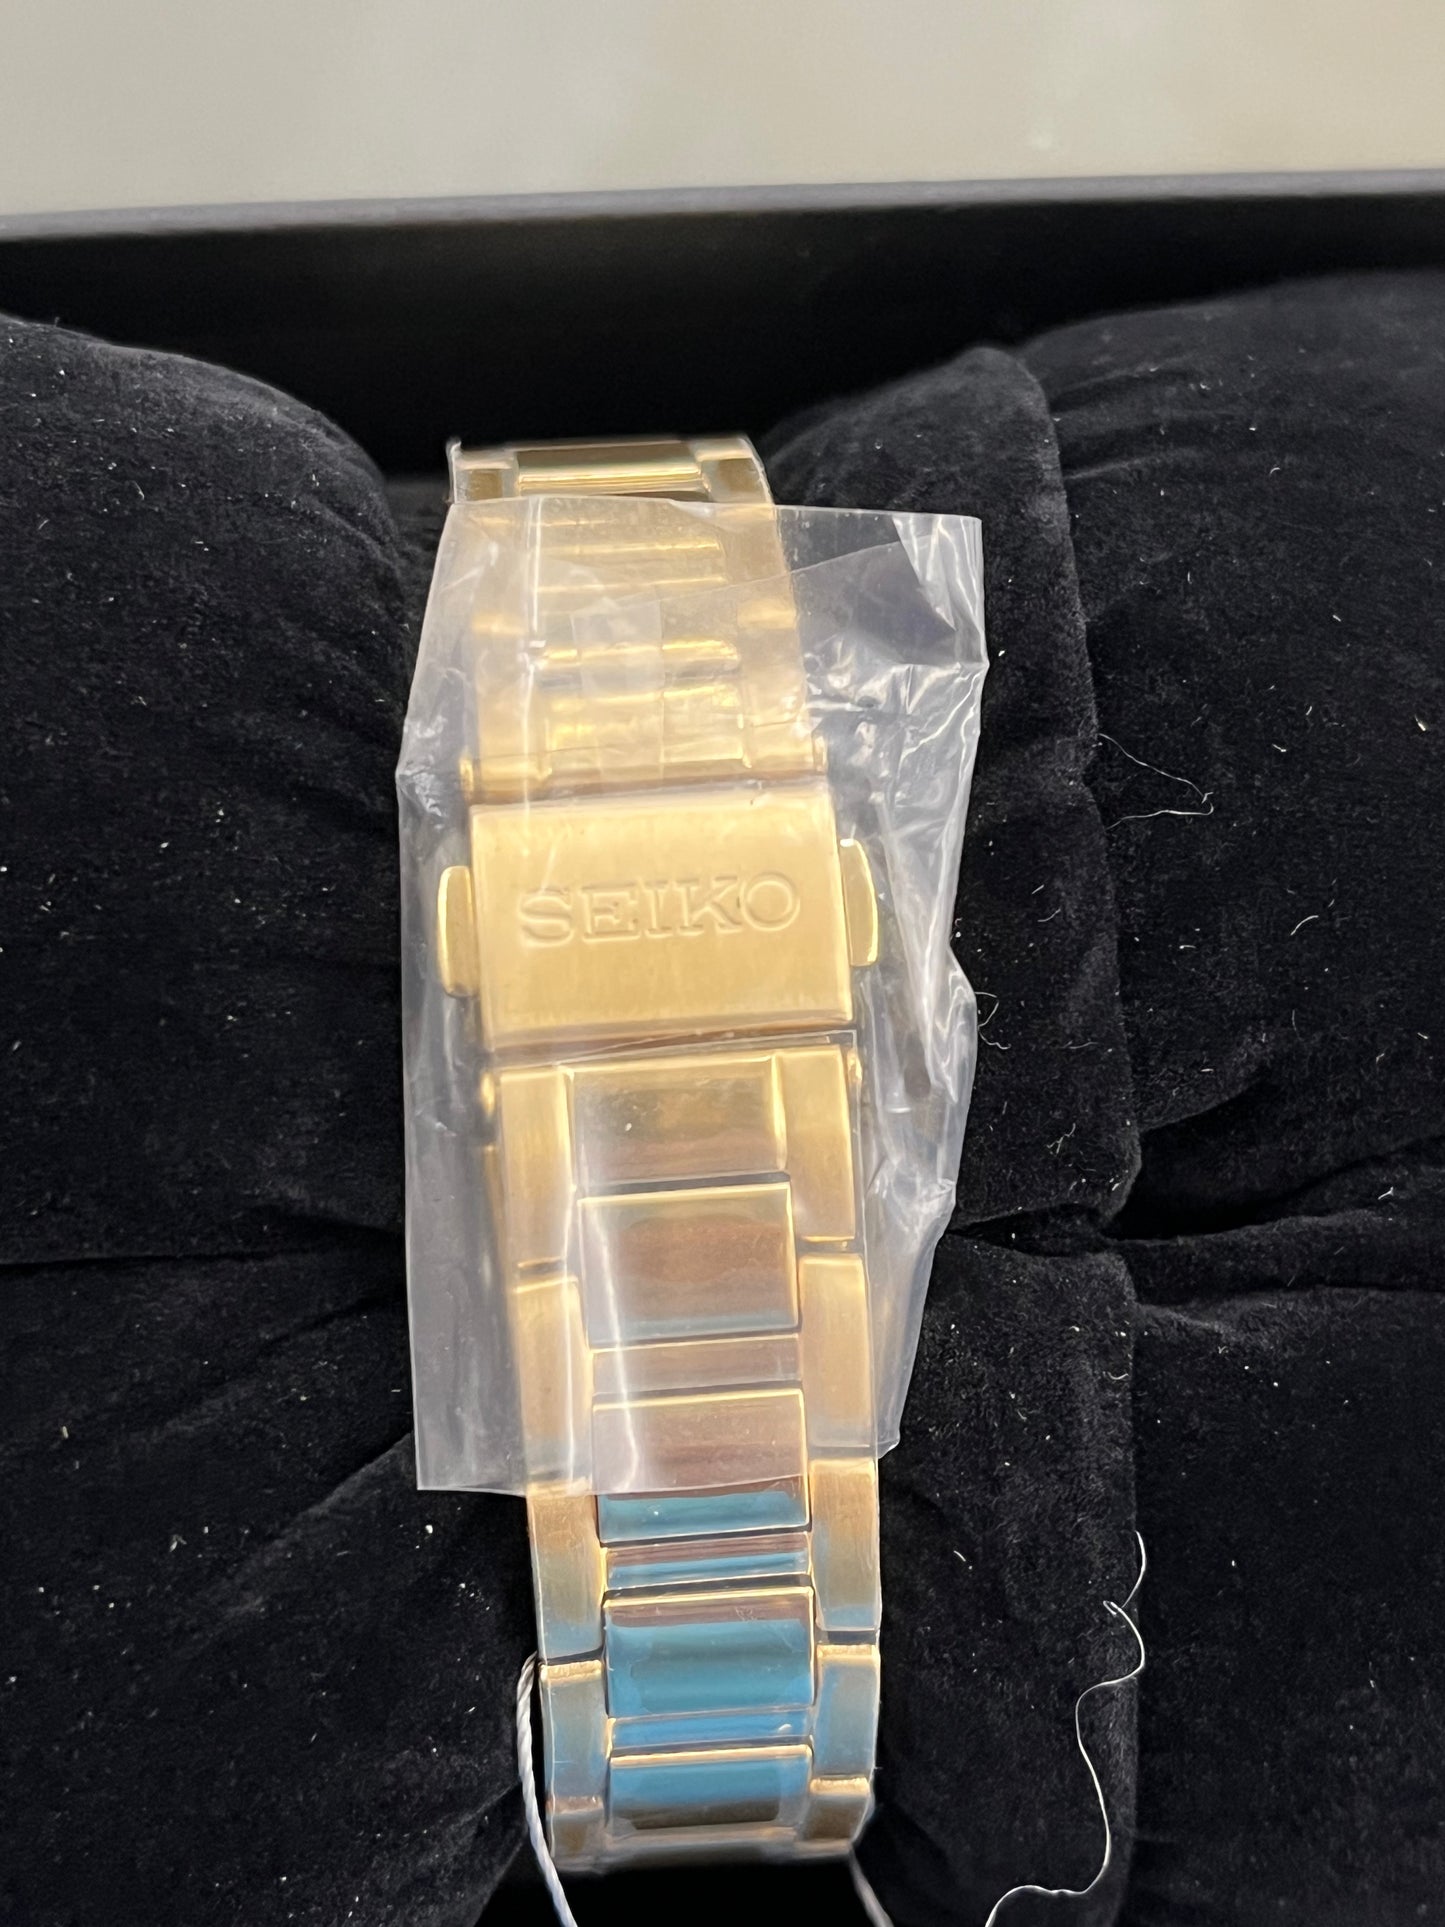 Seiko Women’s Solar Goldtone Mother Of Pearl Watch